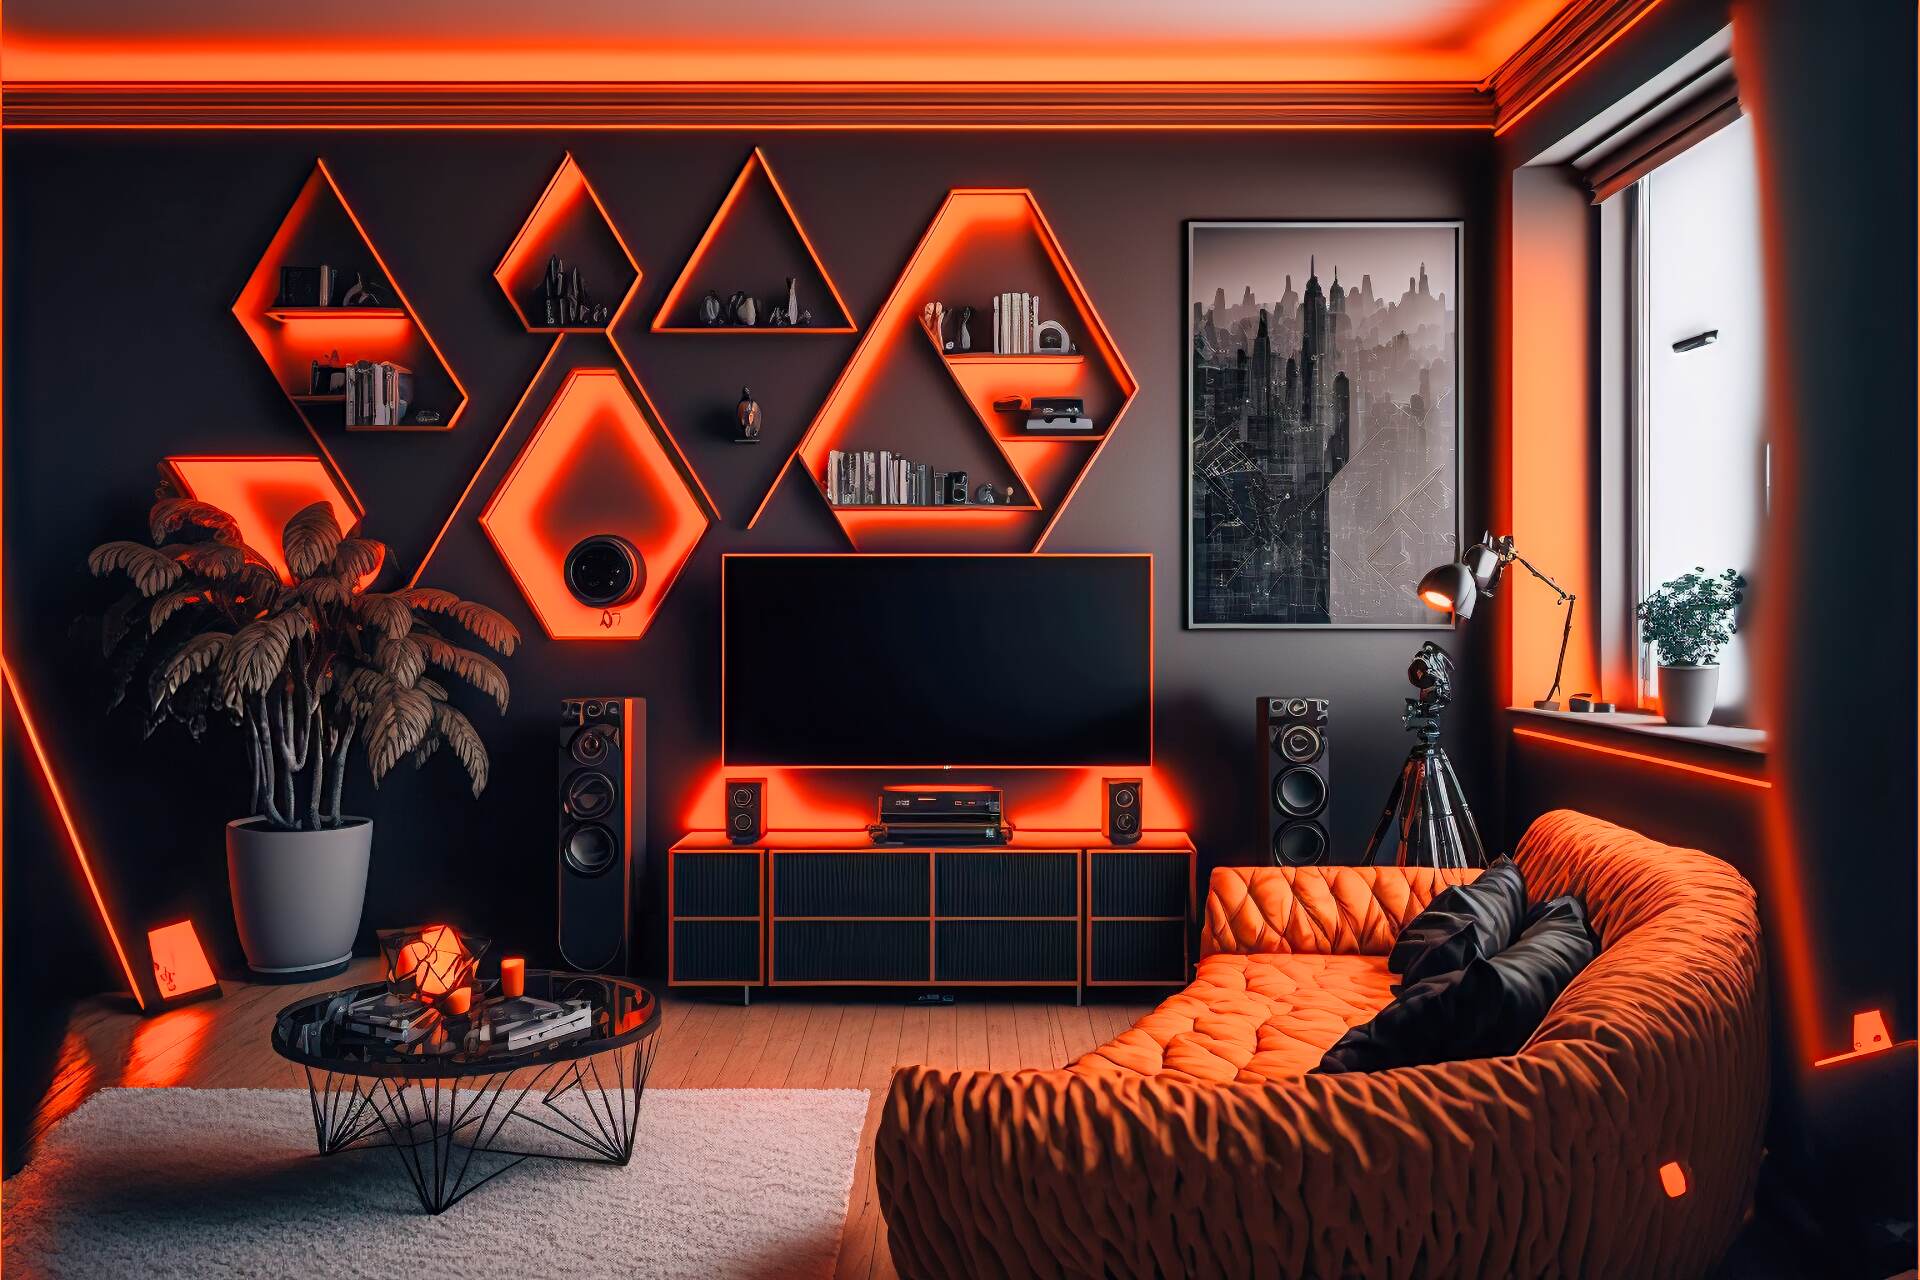 A Cyberpunk-Style Living Room With A Neon Metropolis Vibe. The Walls Are Painted Black And Adorned With Neon Lights In Various Shades Of Orange. The Furniture Is Made Up Of Angular And Geometric Pieces In A Monochromatic Color Scheme Of Black And Silver. A Large Flat Screen Tv Is Mounted On The Wall, Surrounded By More Neon Lights. A High-Tech Sound System And A Holographic Gaming Console Complete The Look.